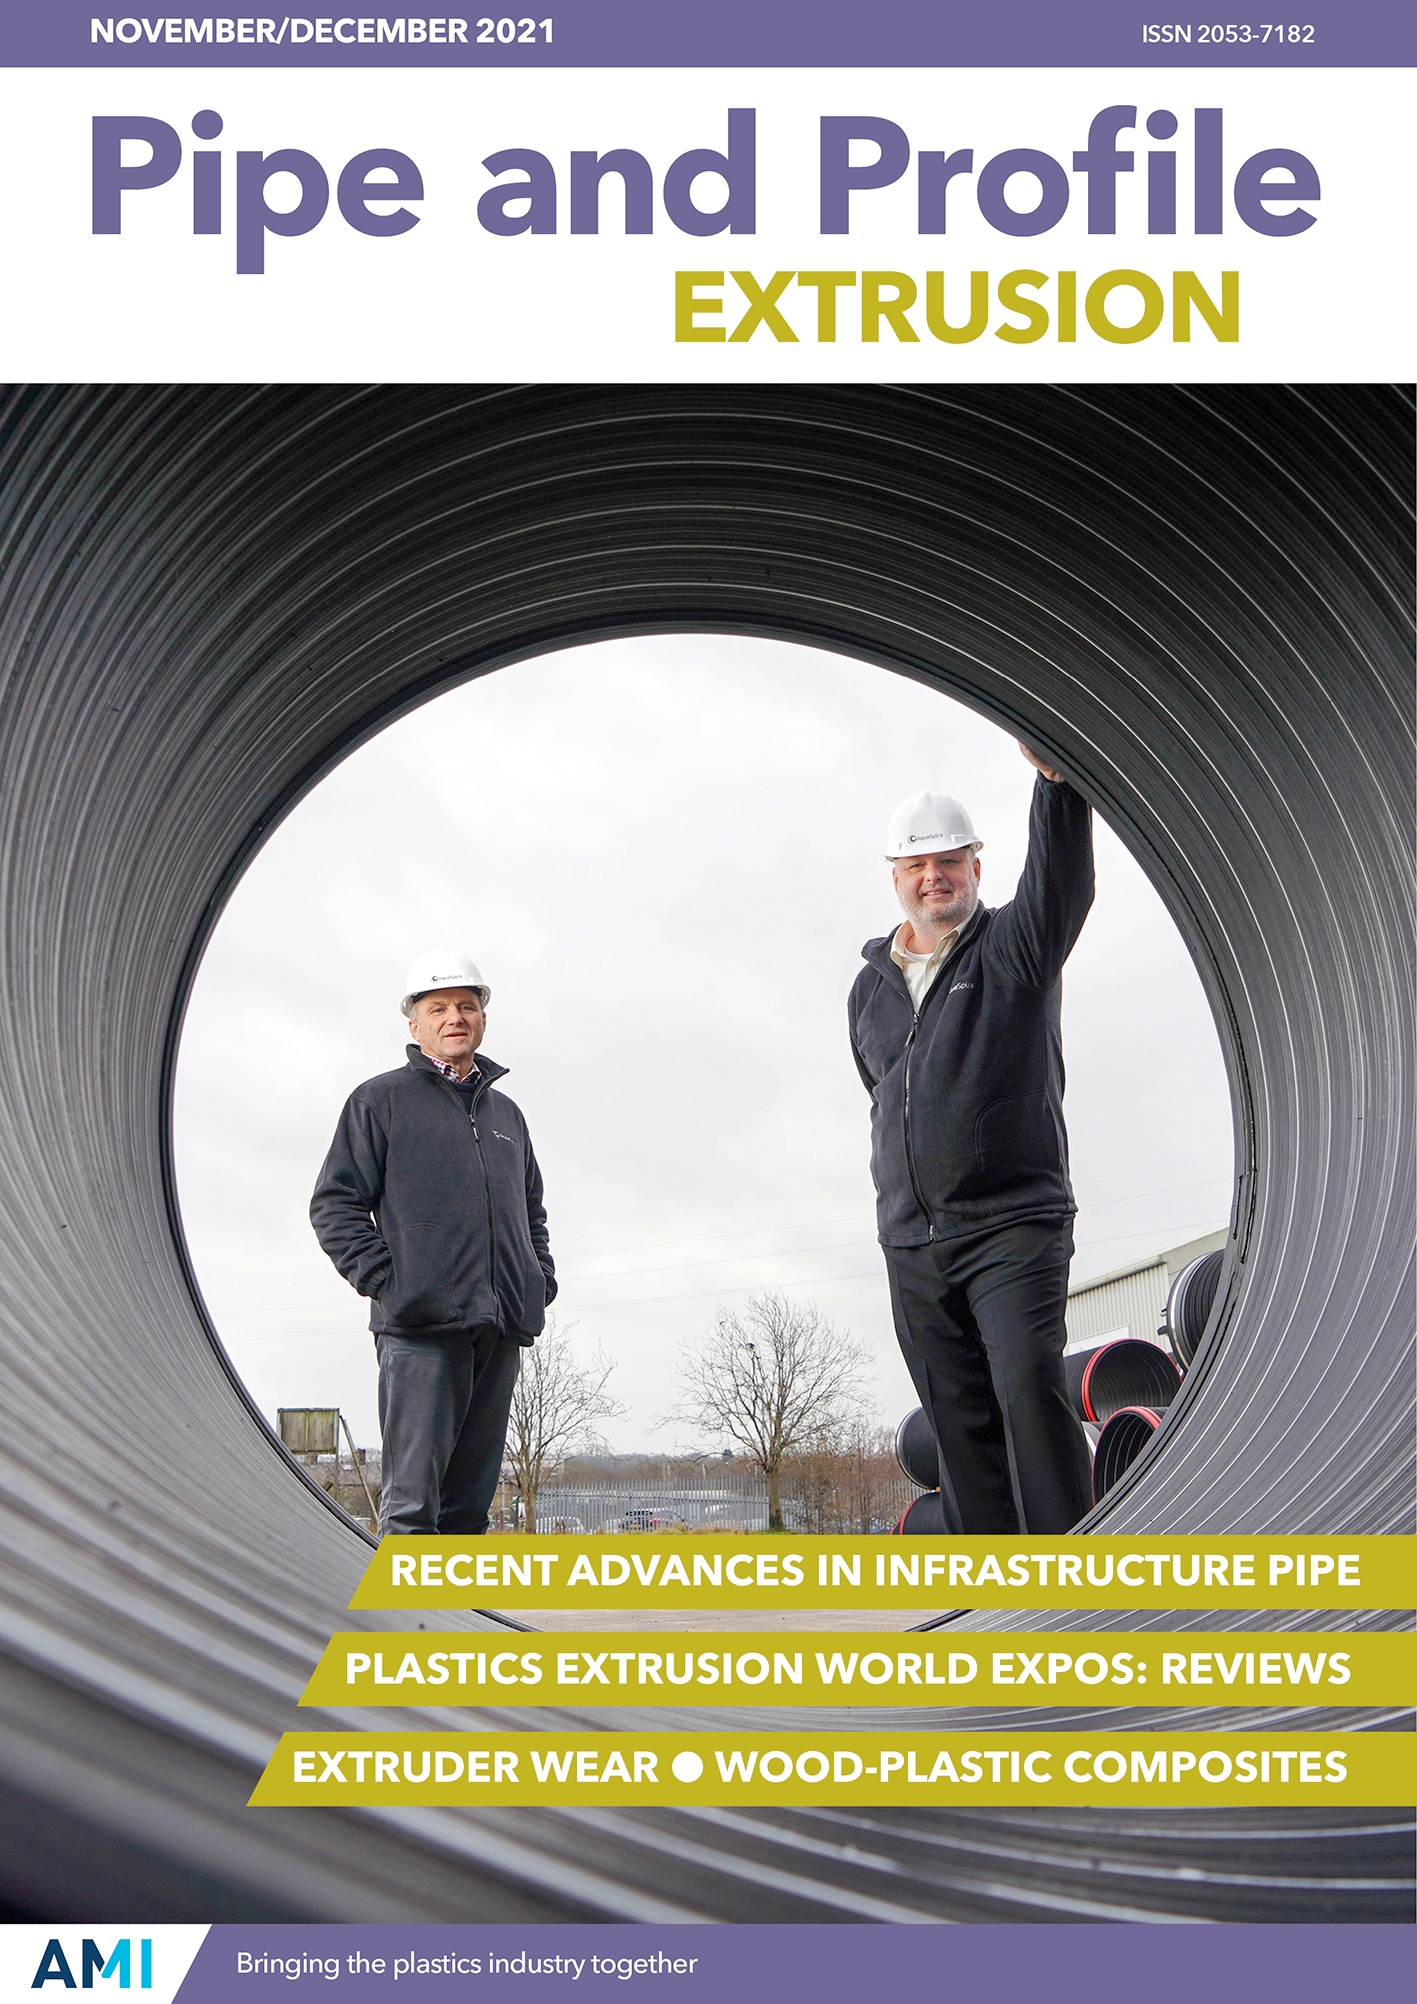 Pipe and Profile Extrusion November/December 2021